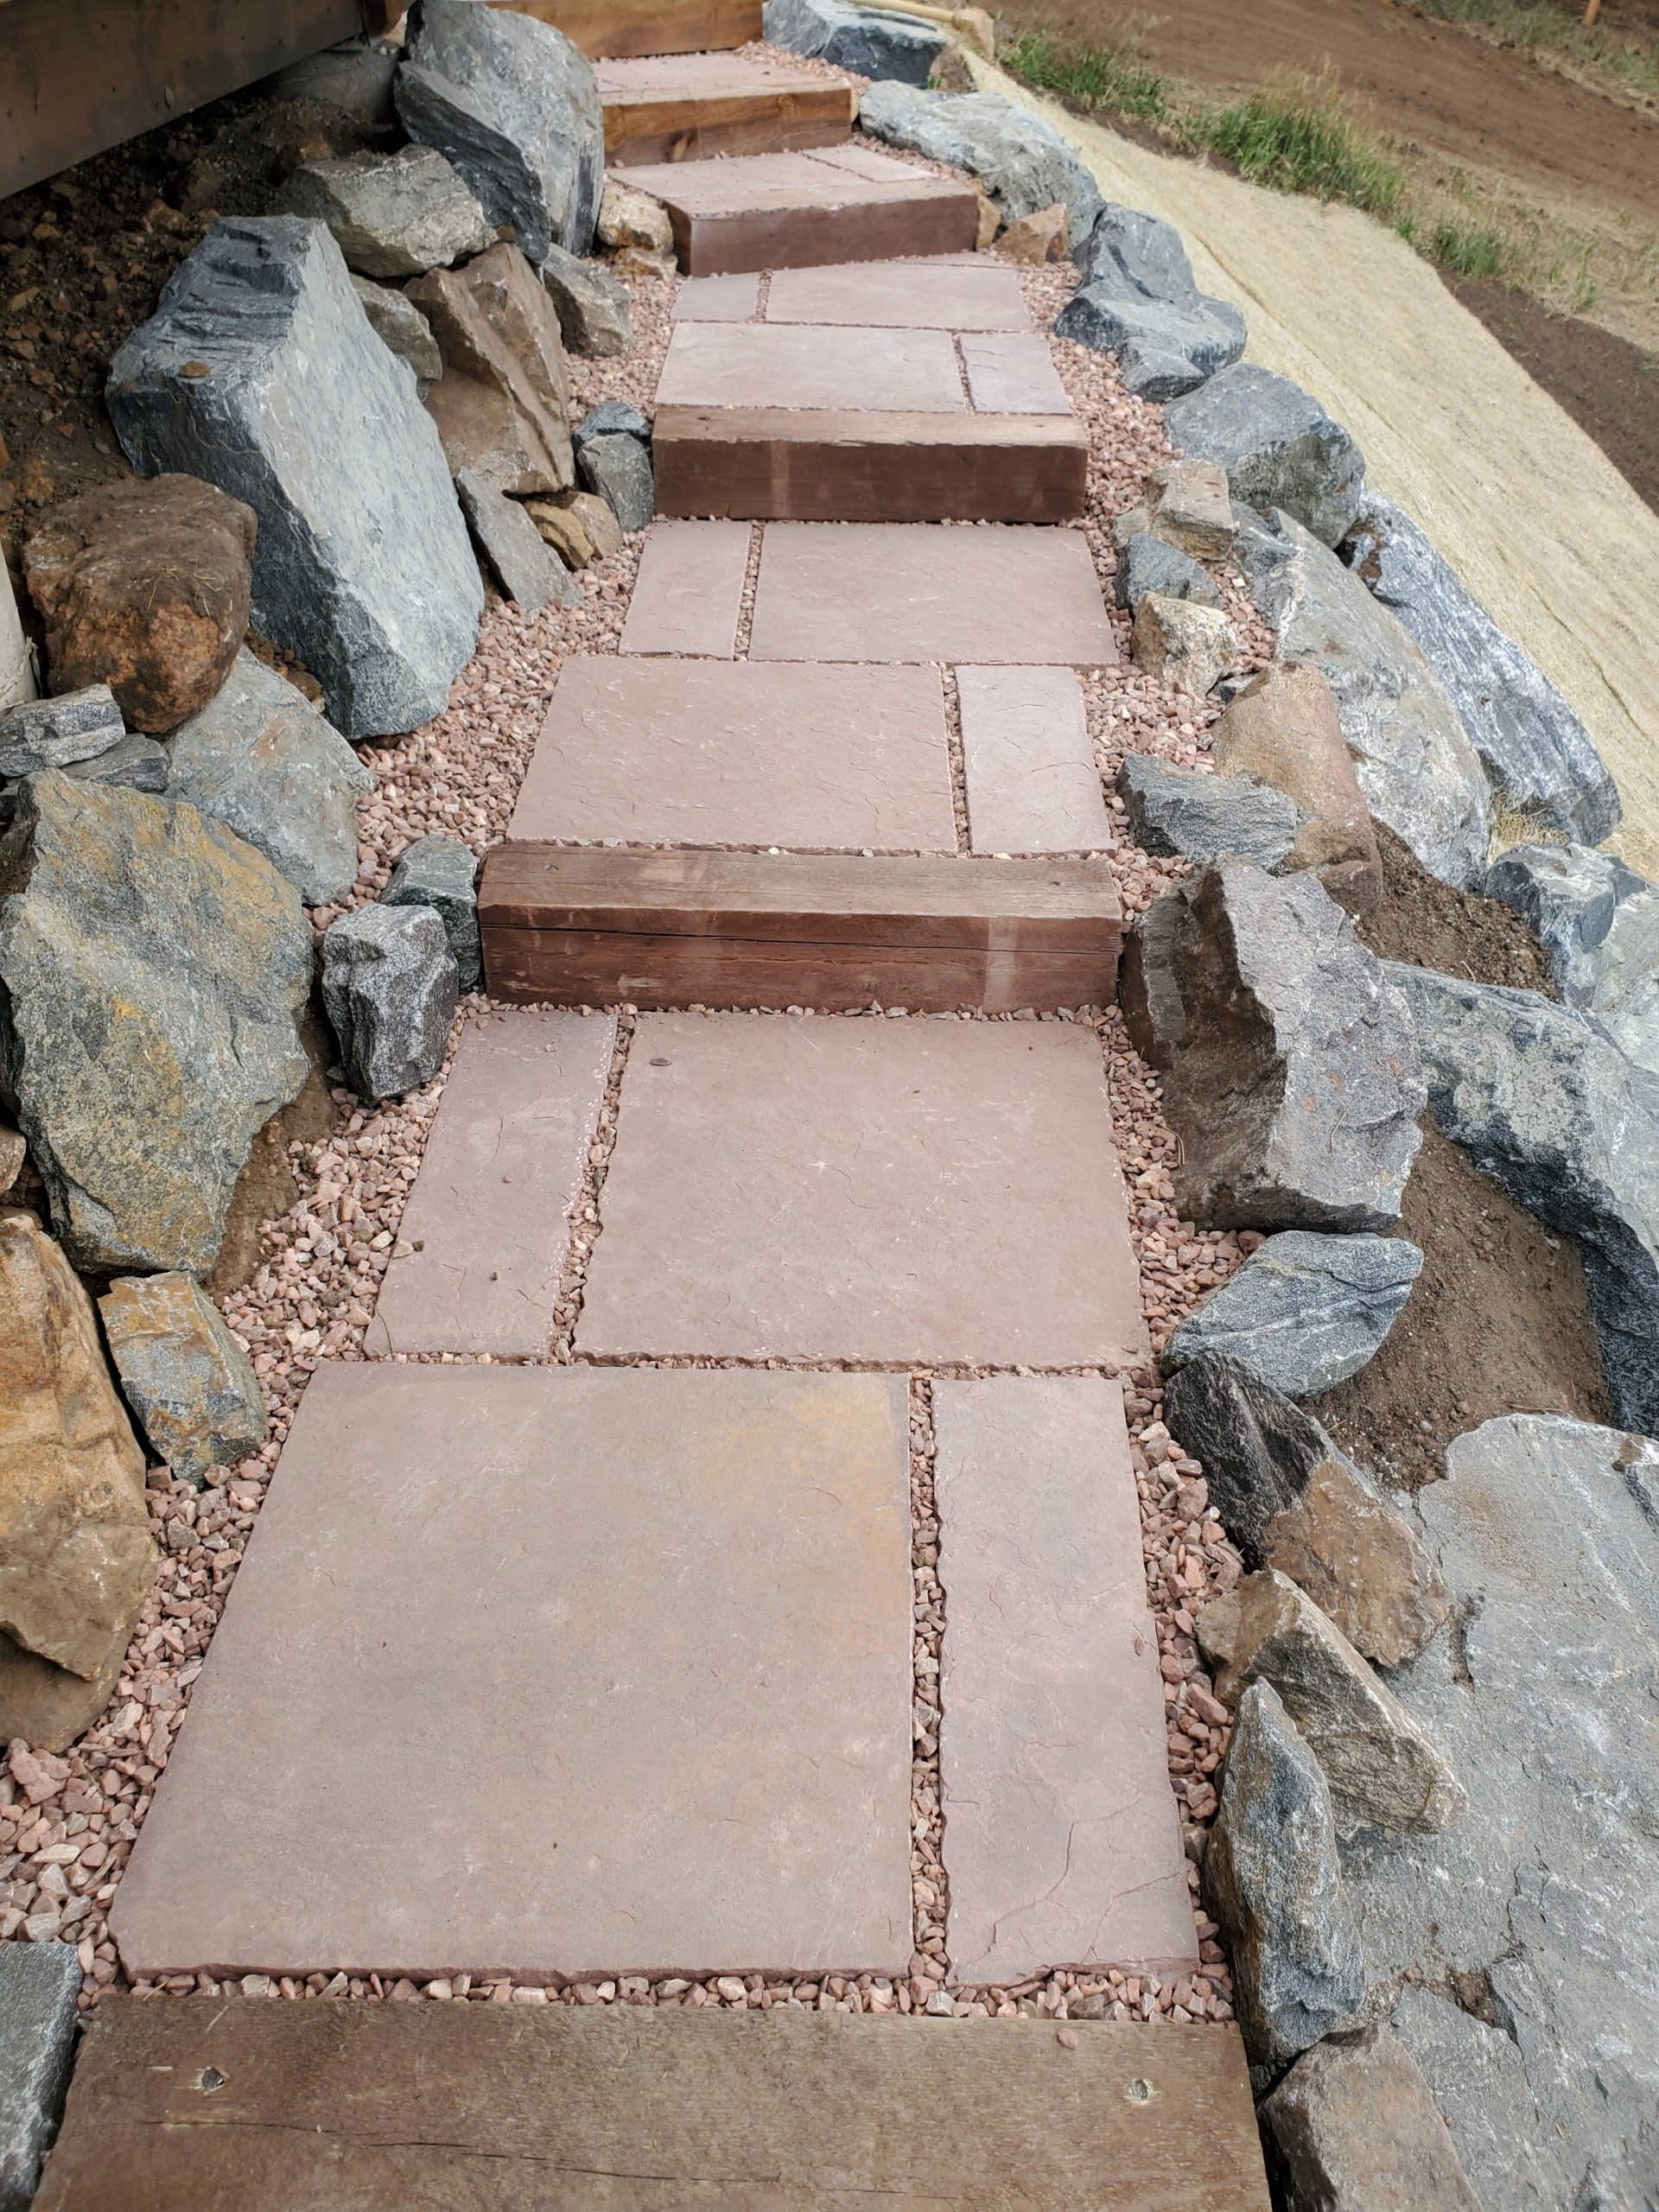 Oversized stairs made of red stone, with red gravel surrounding.